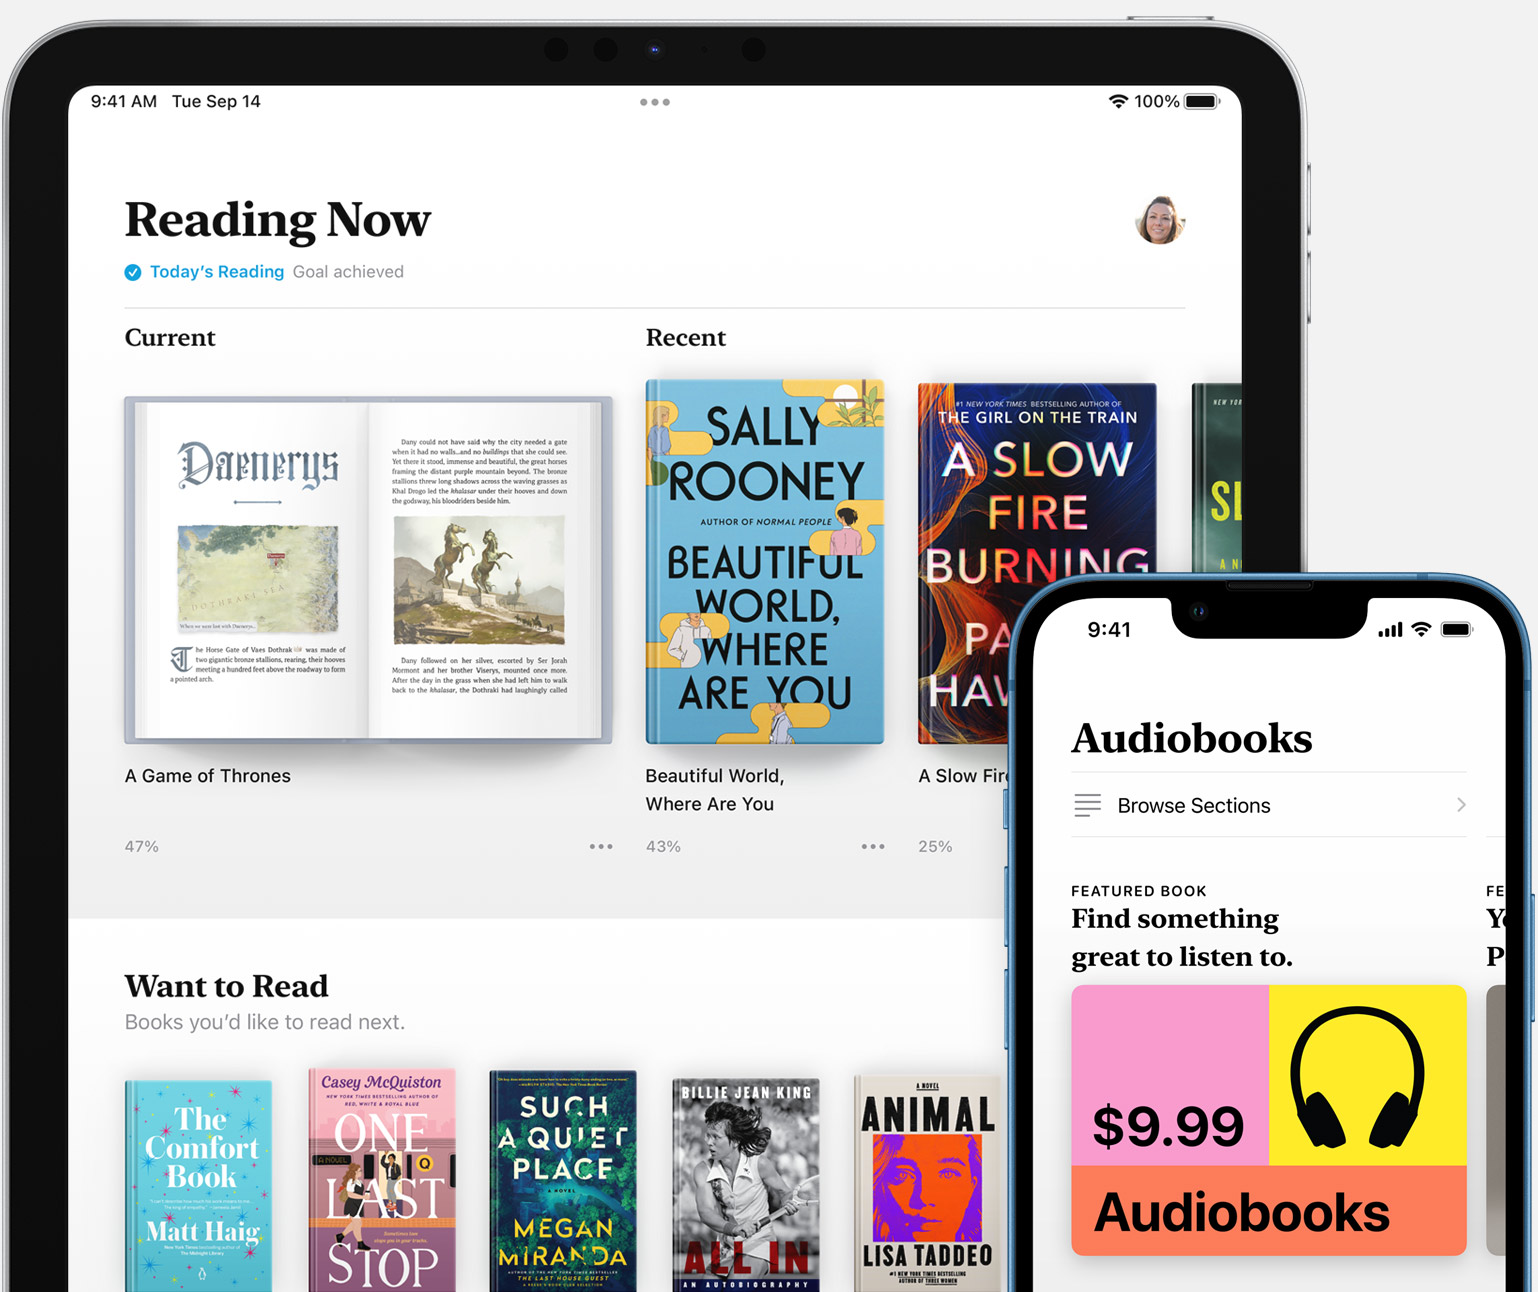 Apple may launch an audiobooks subscription service to rival Audible later this year